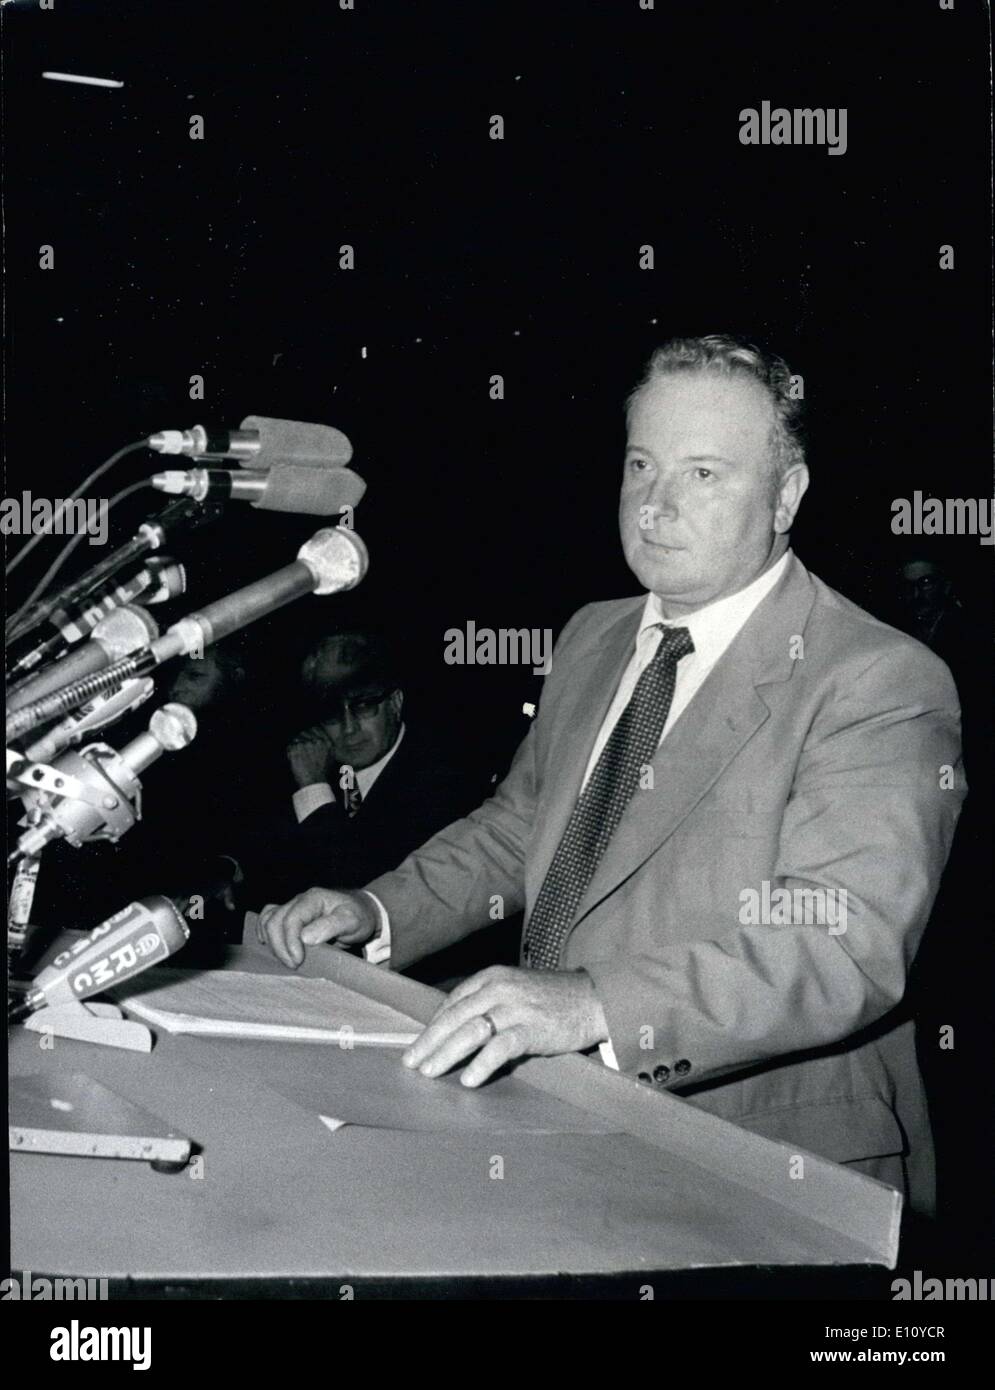 Sep. 06, 1974 - At a meeting held last night, Georges Seguy, the ...